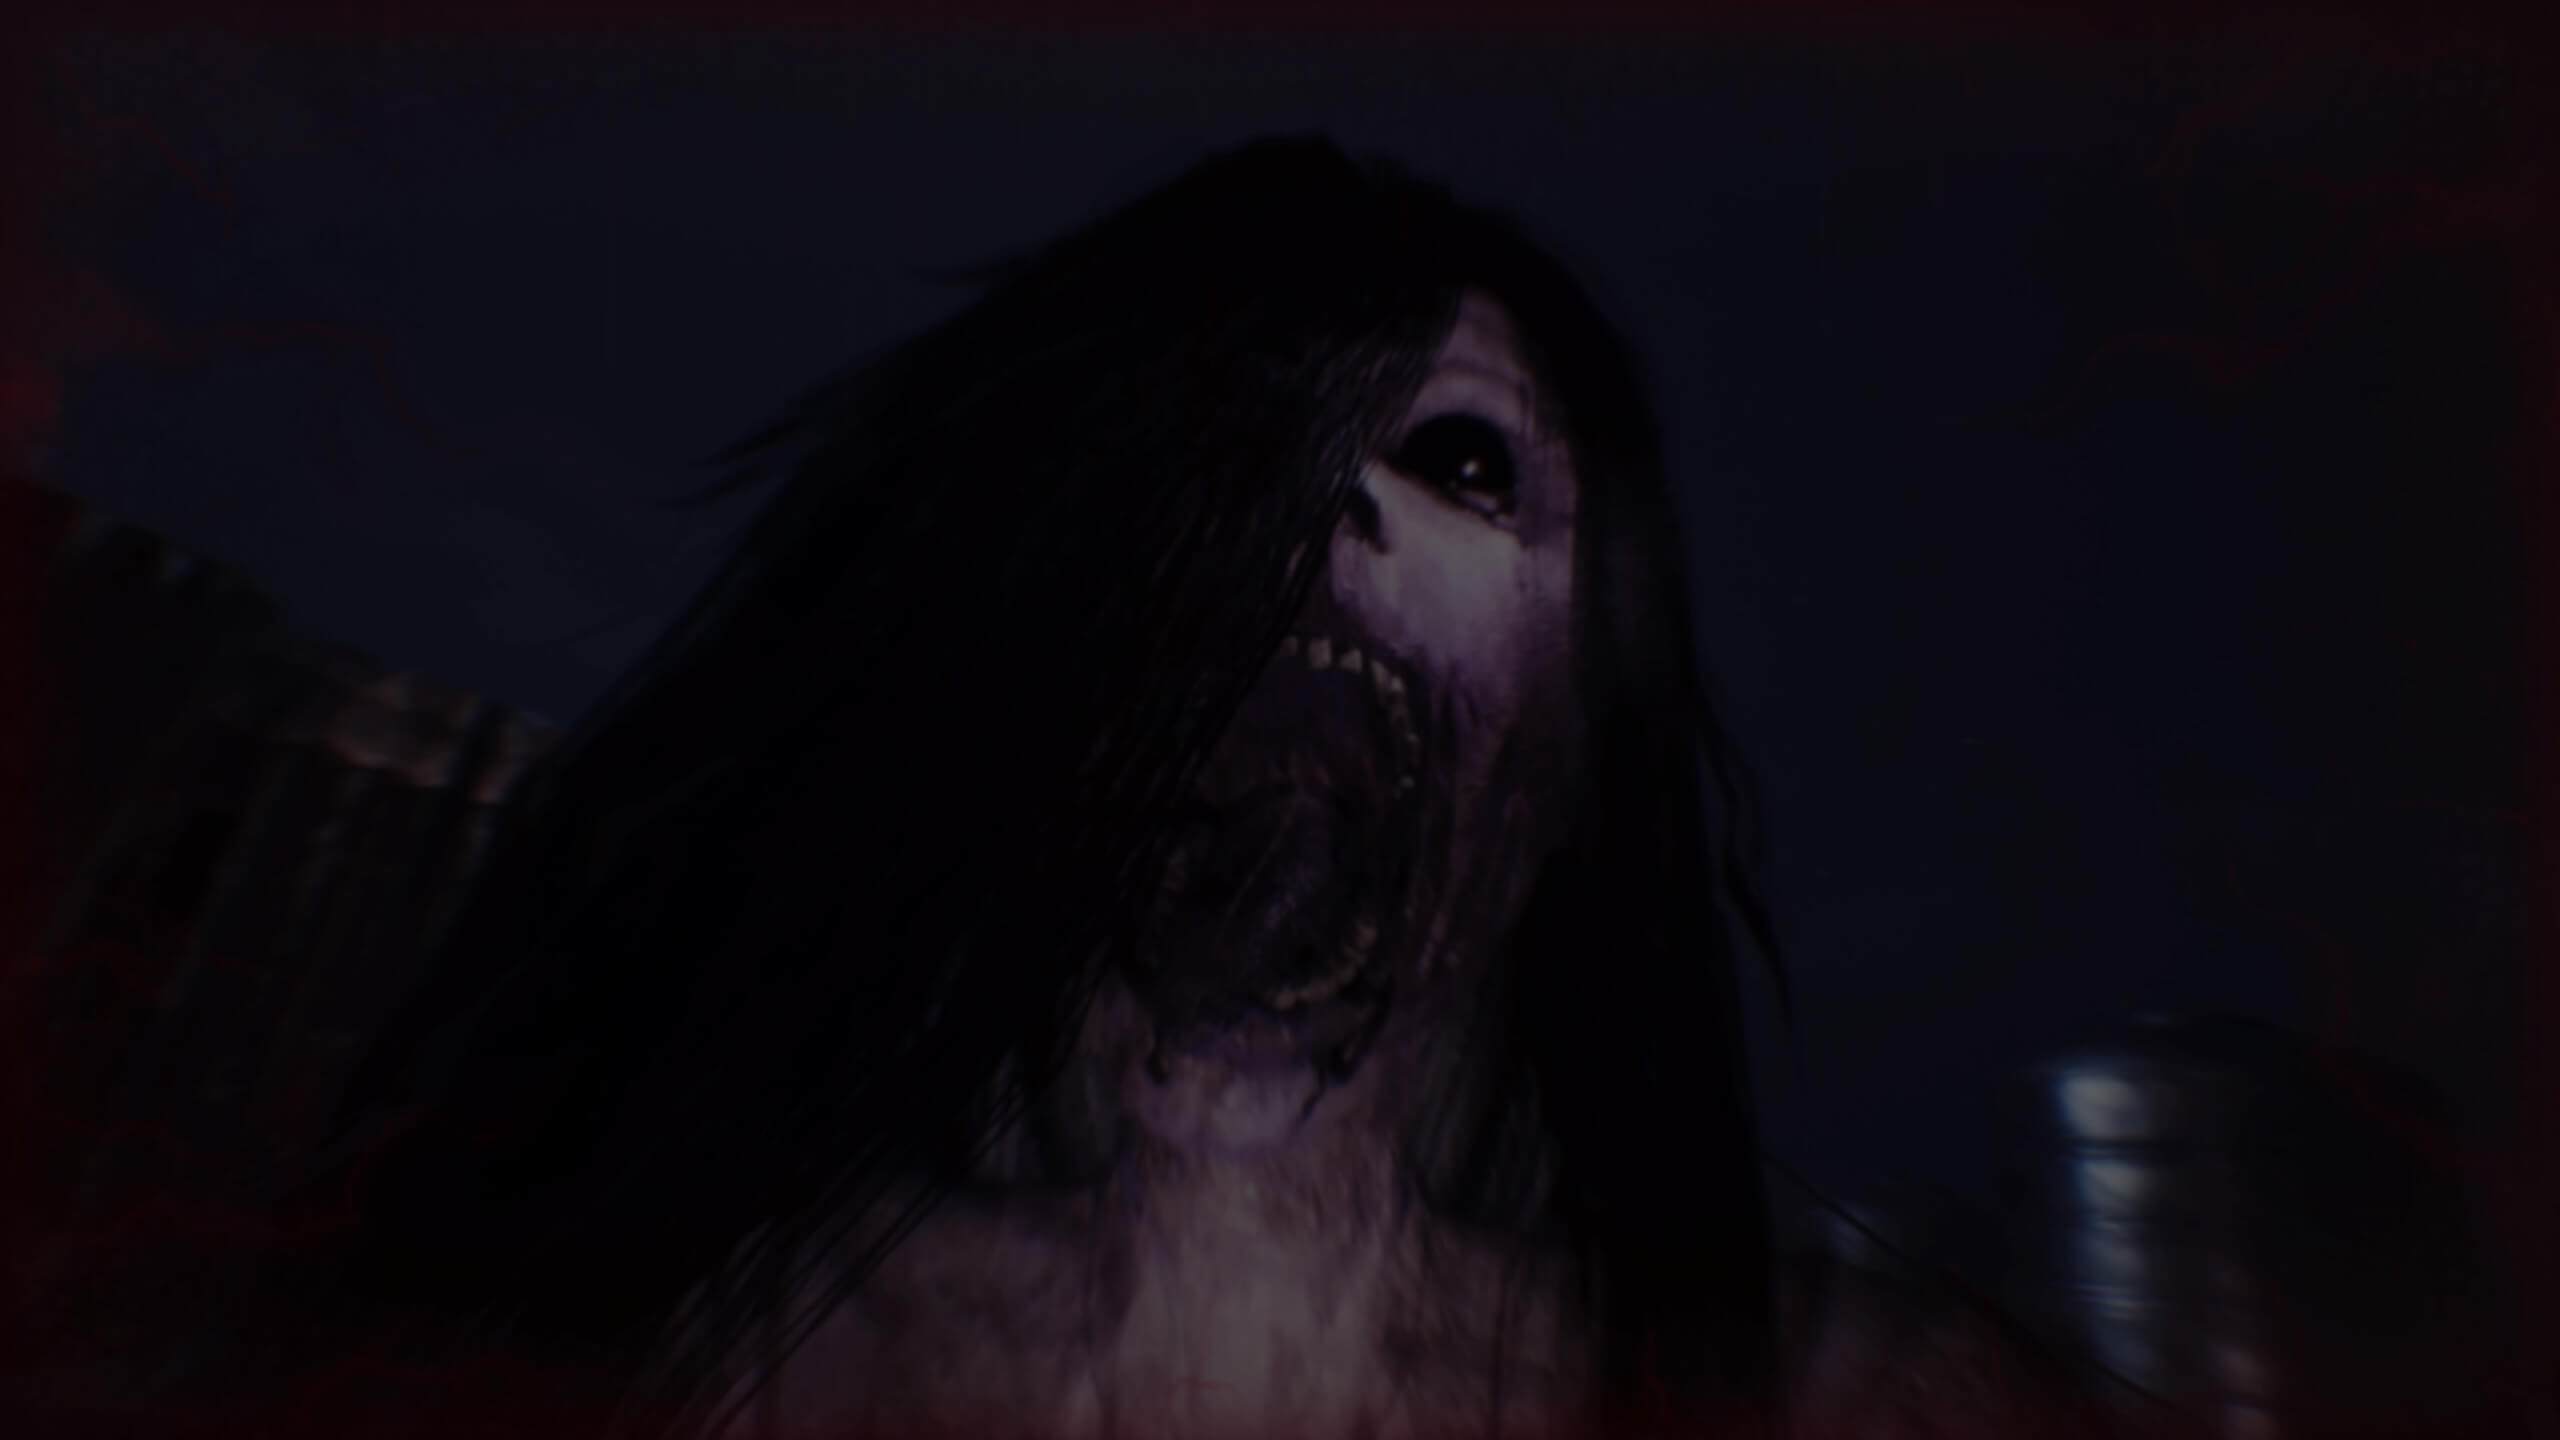 A ghostly figure with black hair opens her mouth to attack you in a dark scene